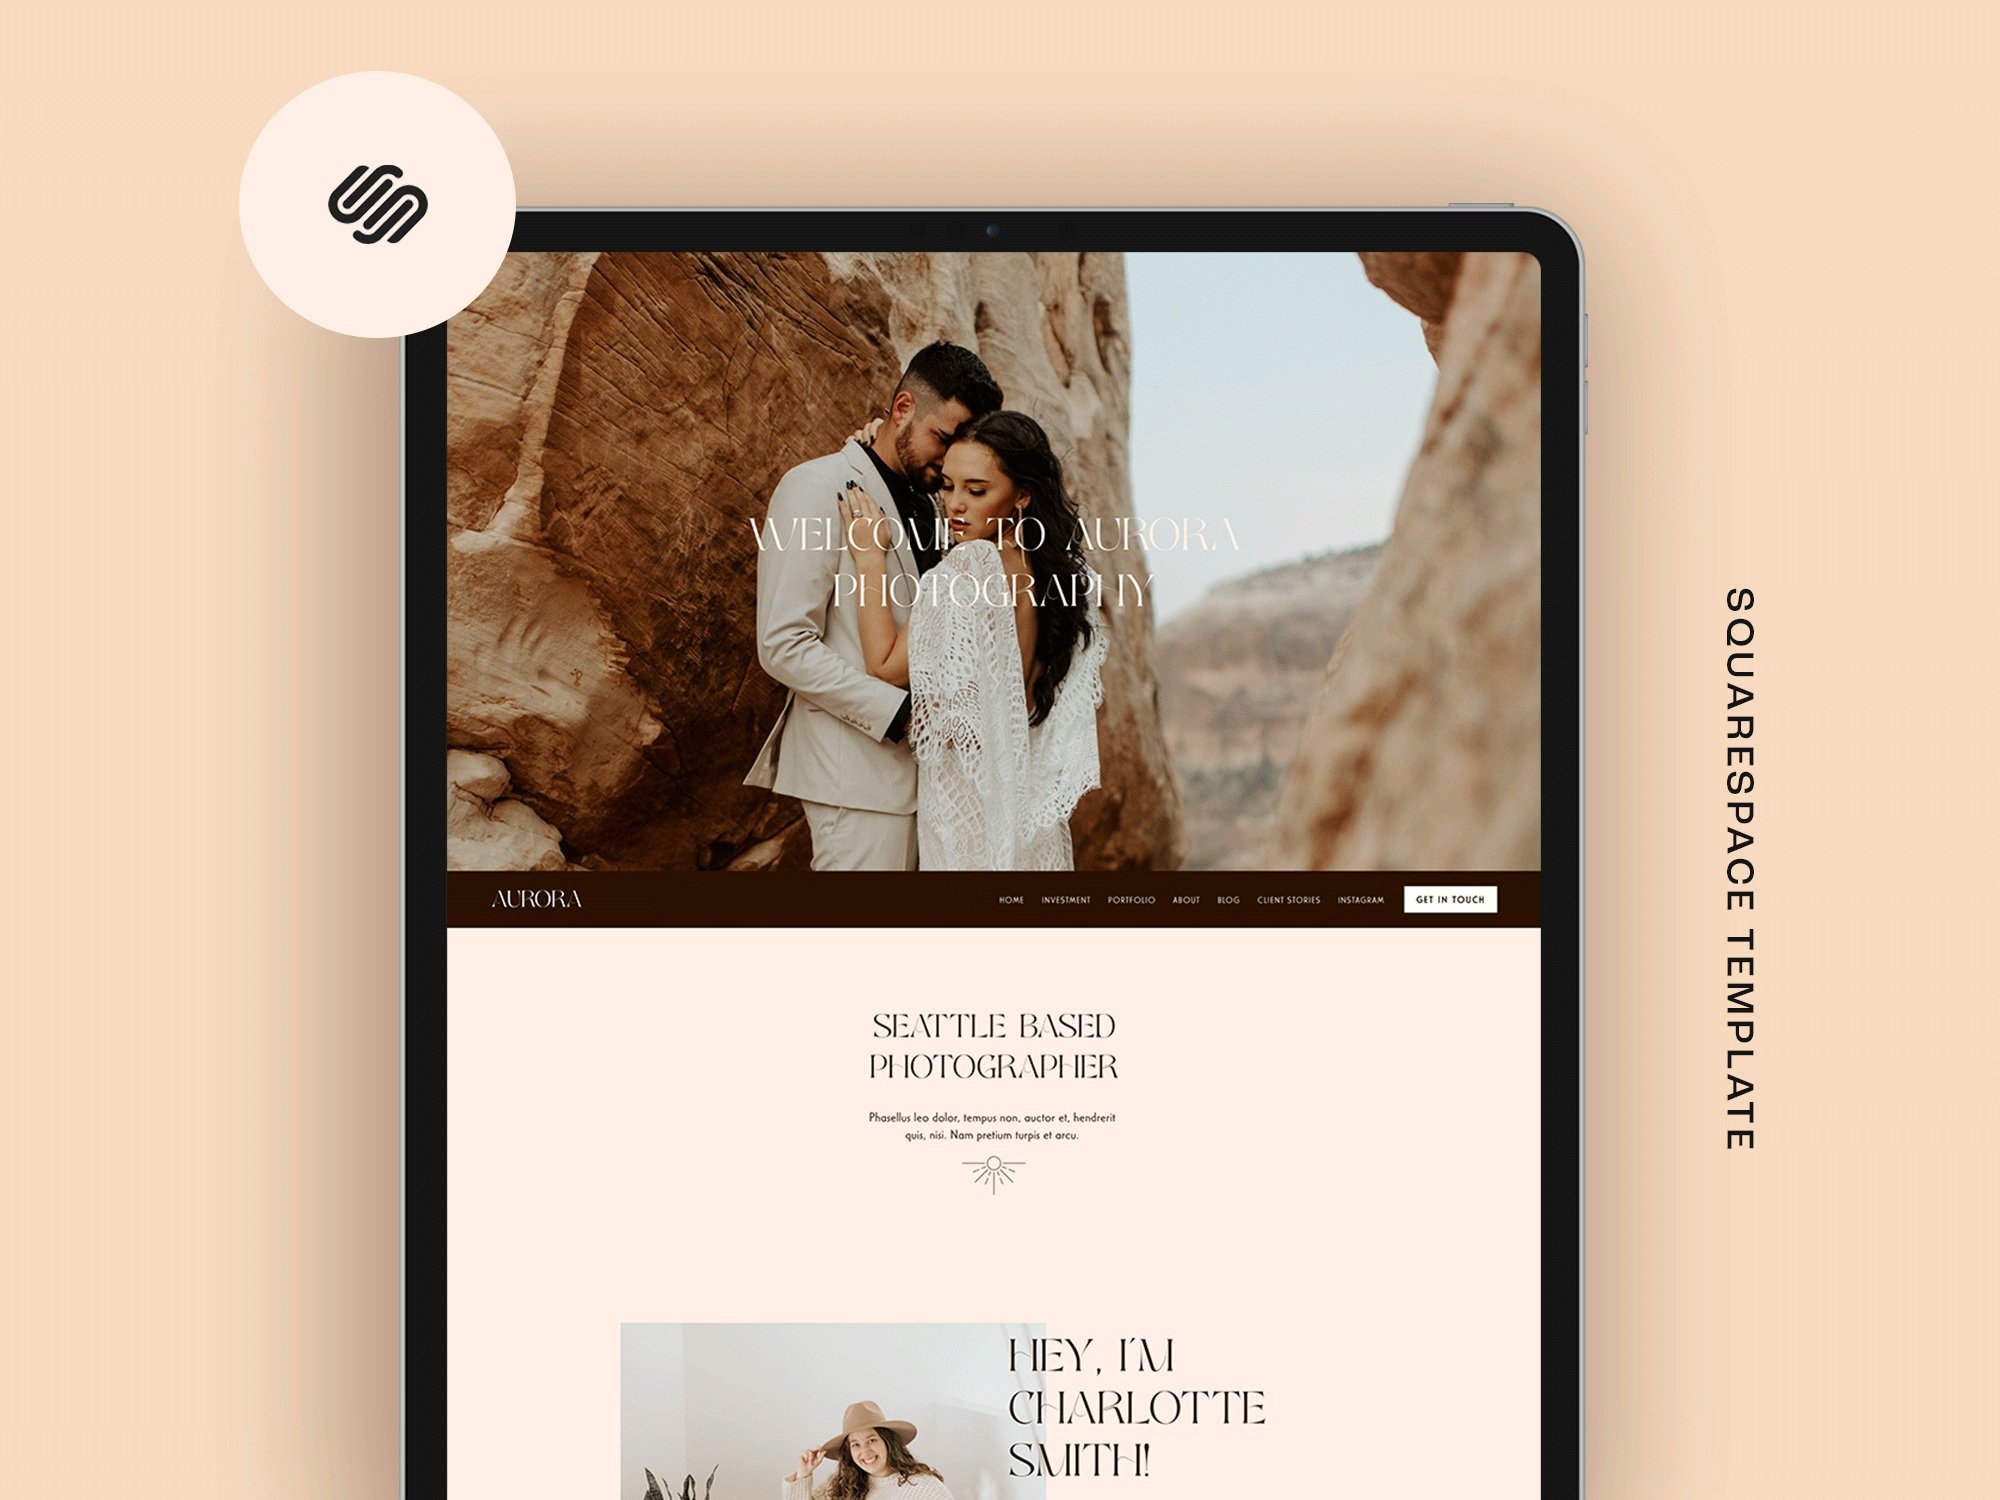 26+ Best Squarespace Templates For Photographers [2022]